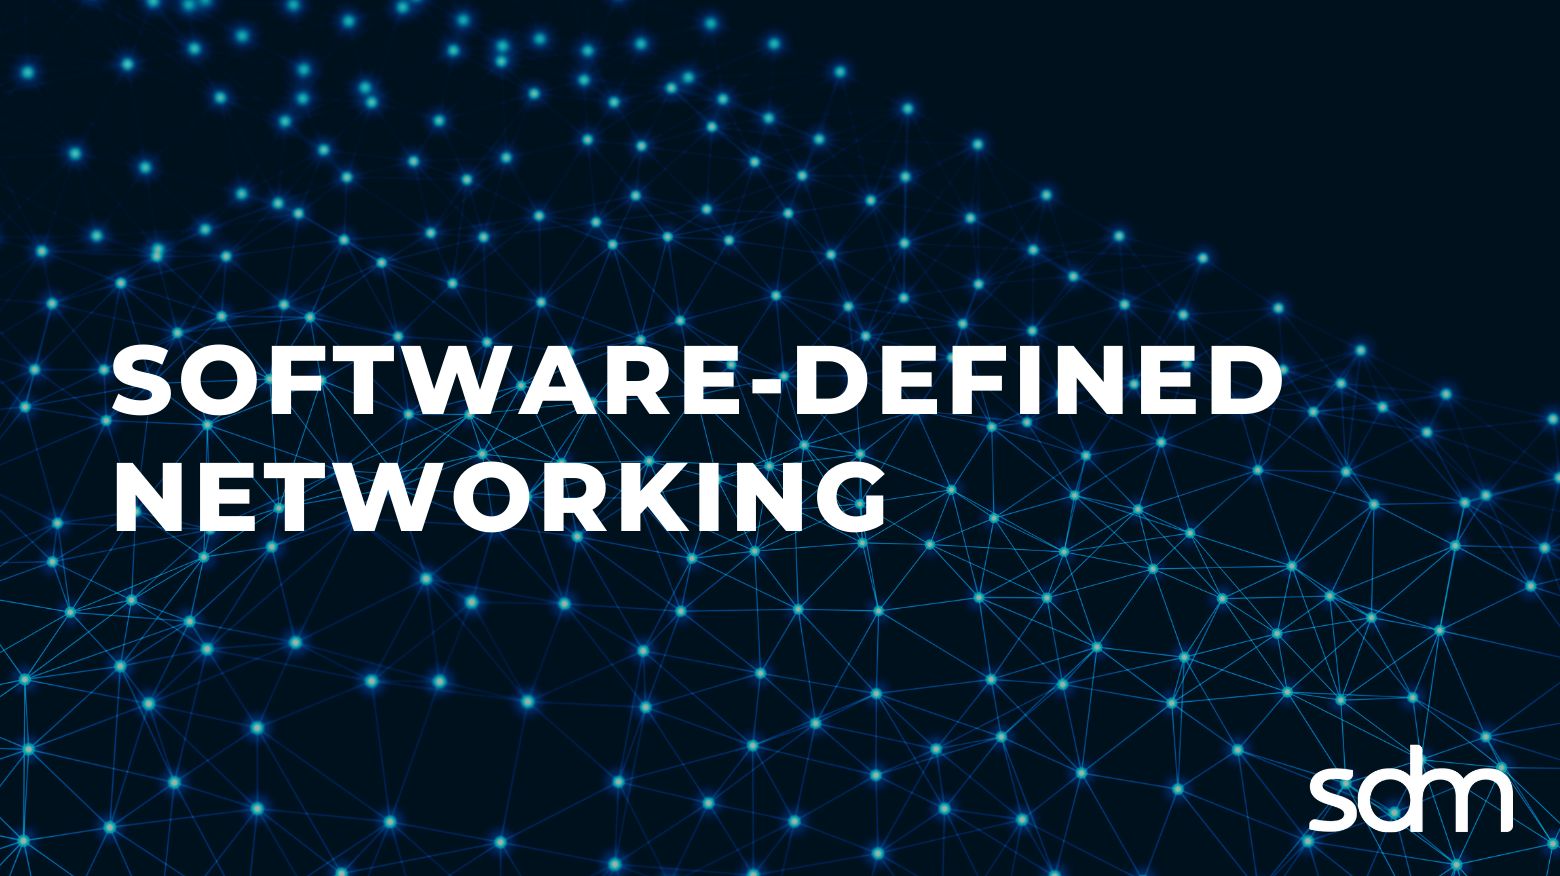 What is a Software-Defined Network (SDN)?